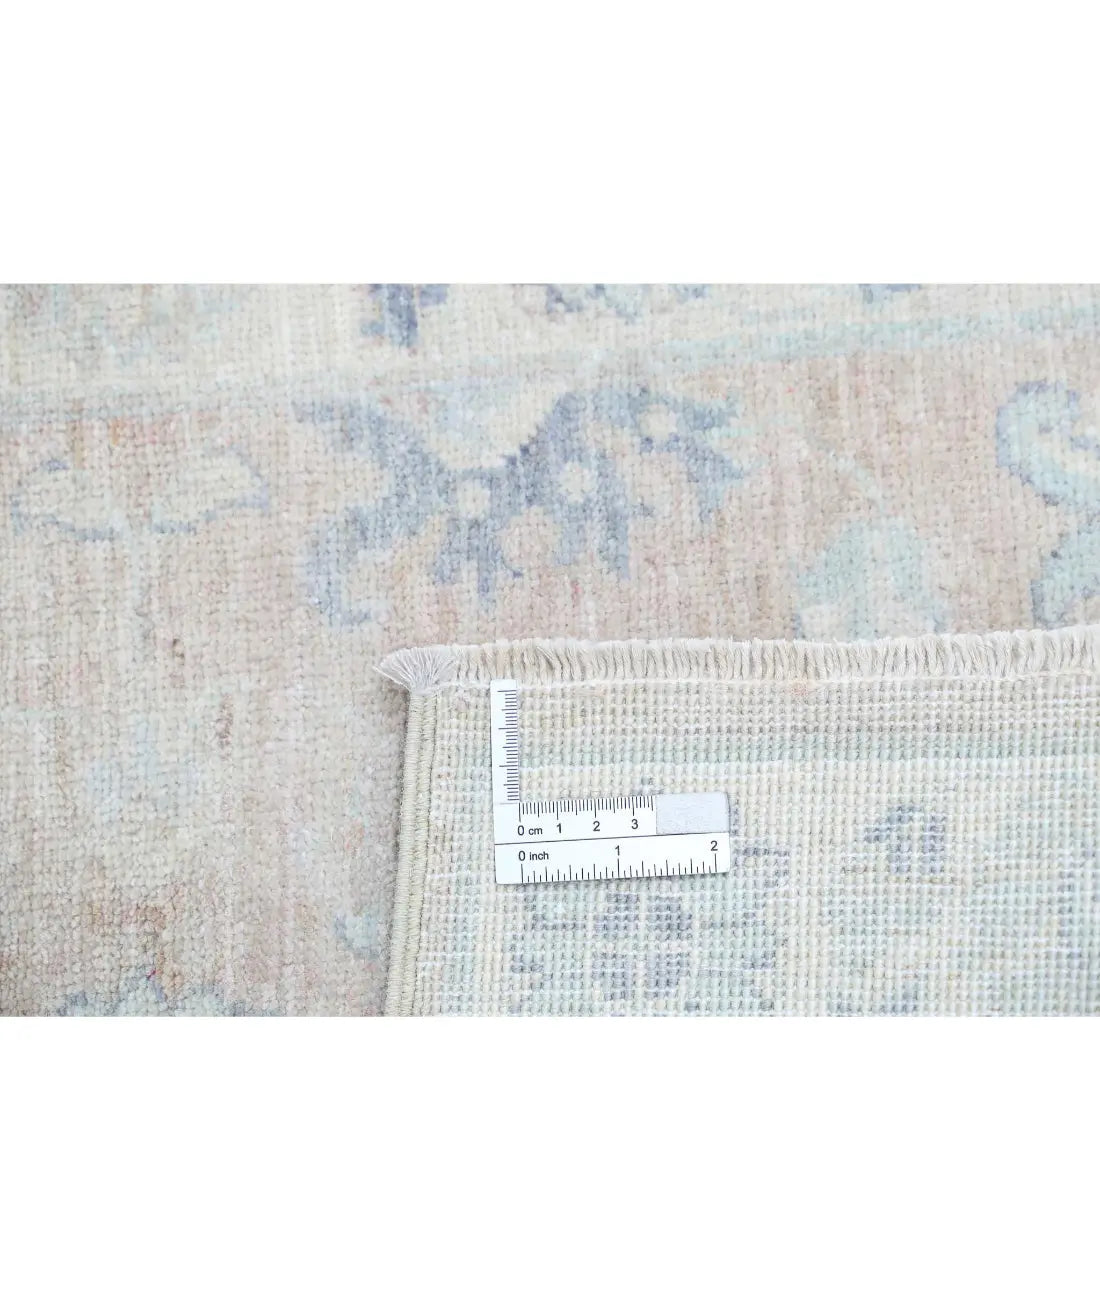 Hand Knotted Serenity Wool Rug - 2'1'' x 3'0''